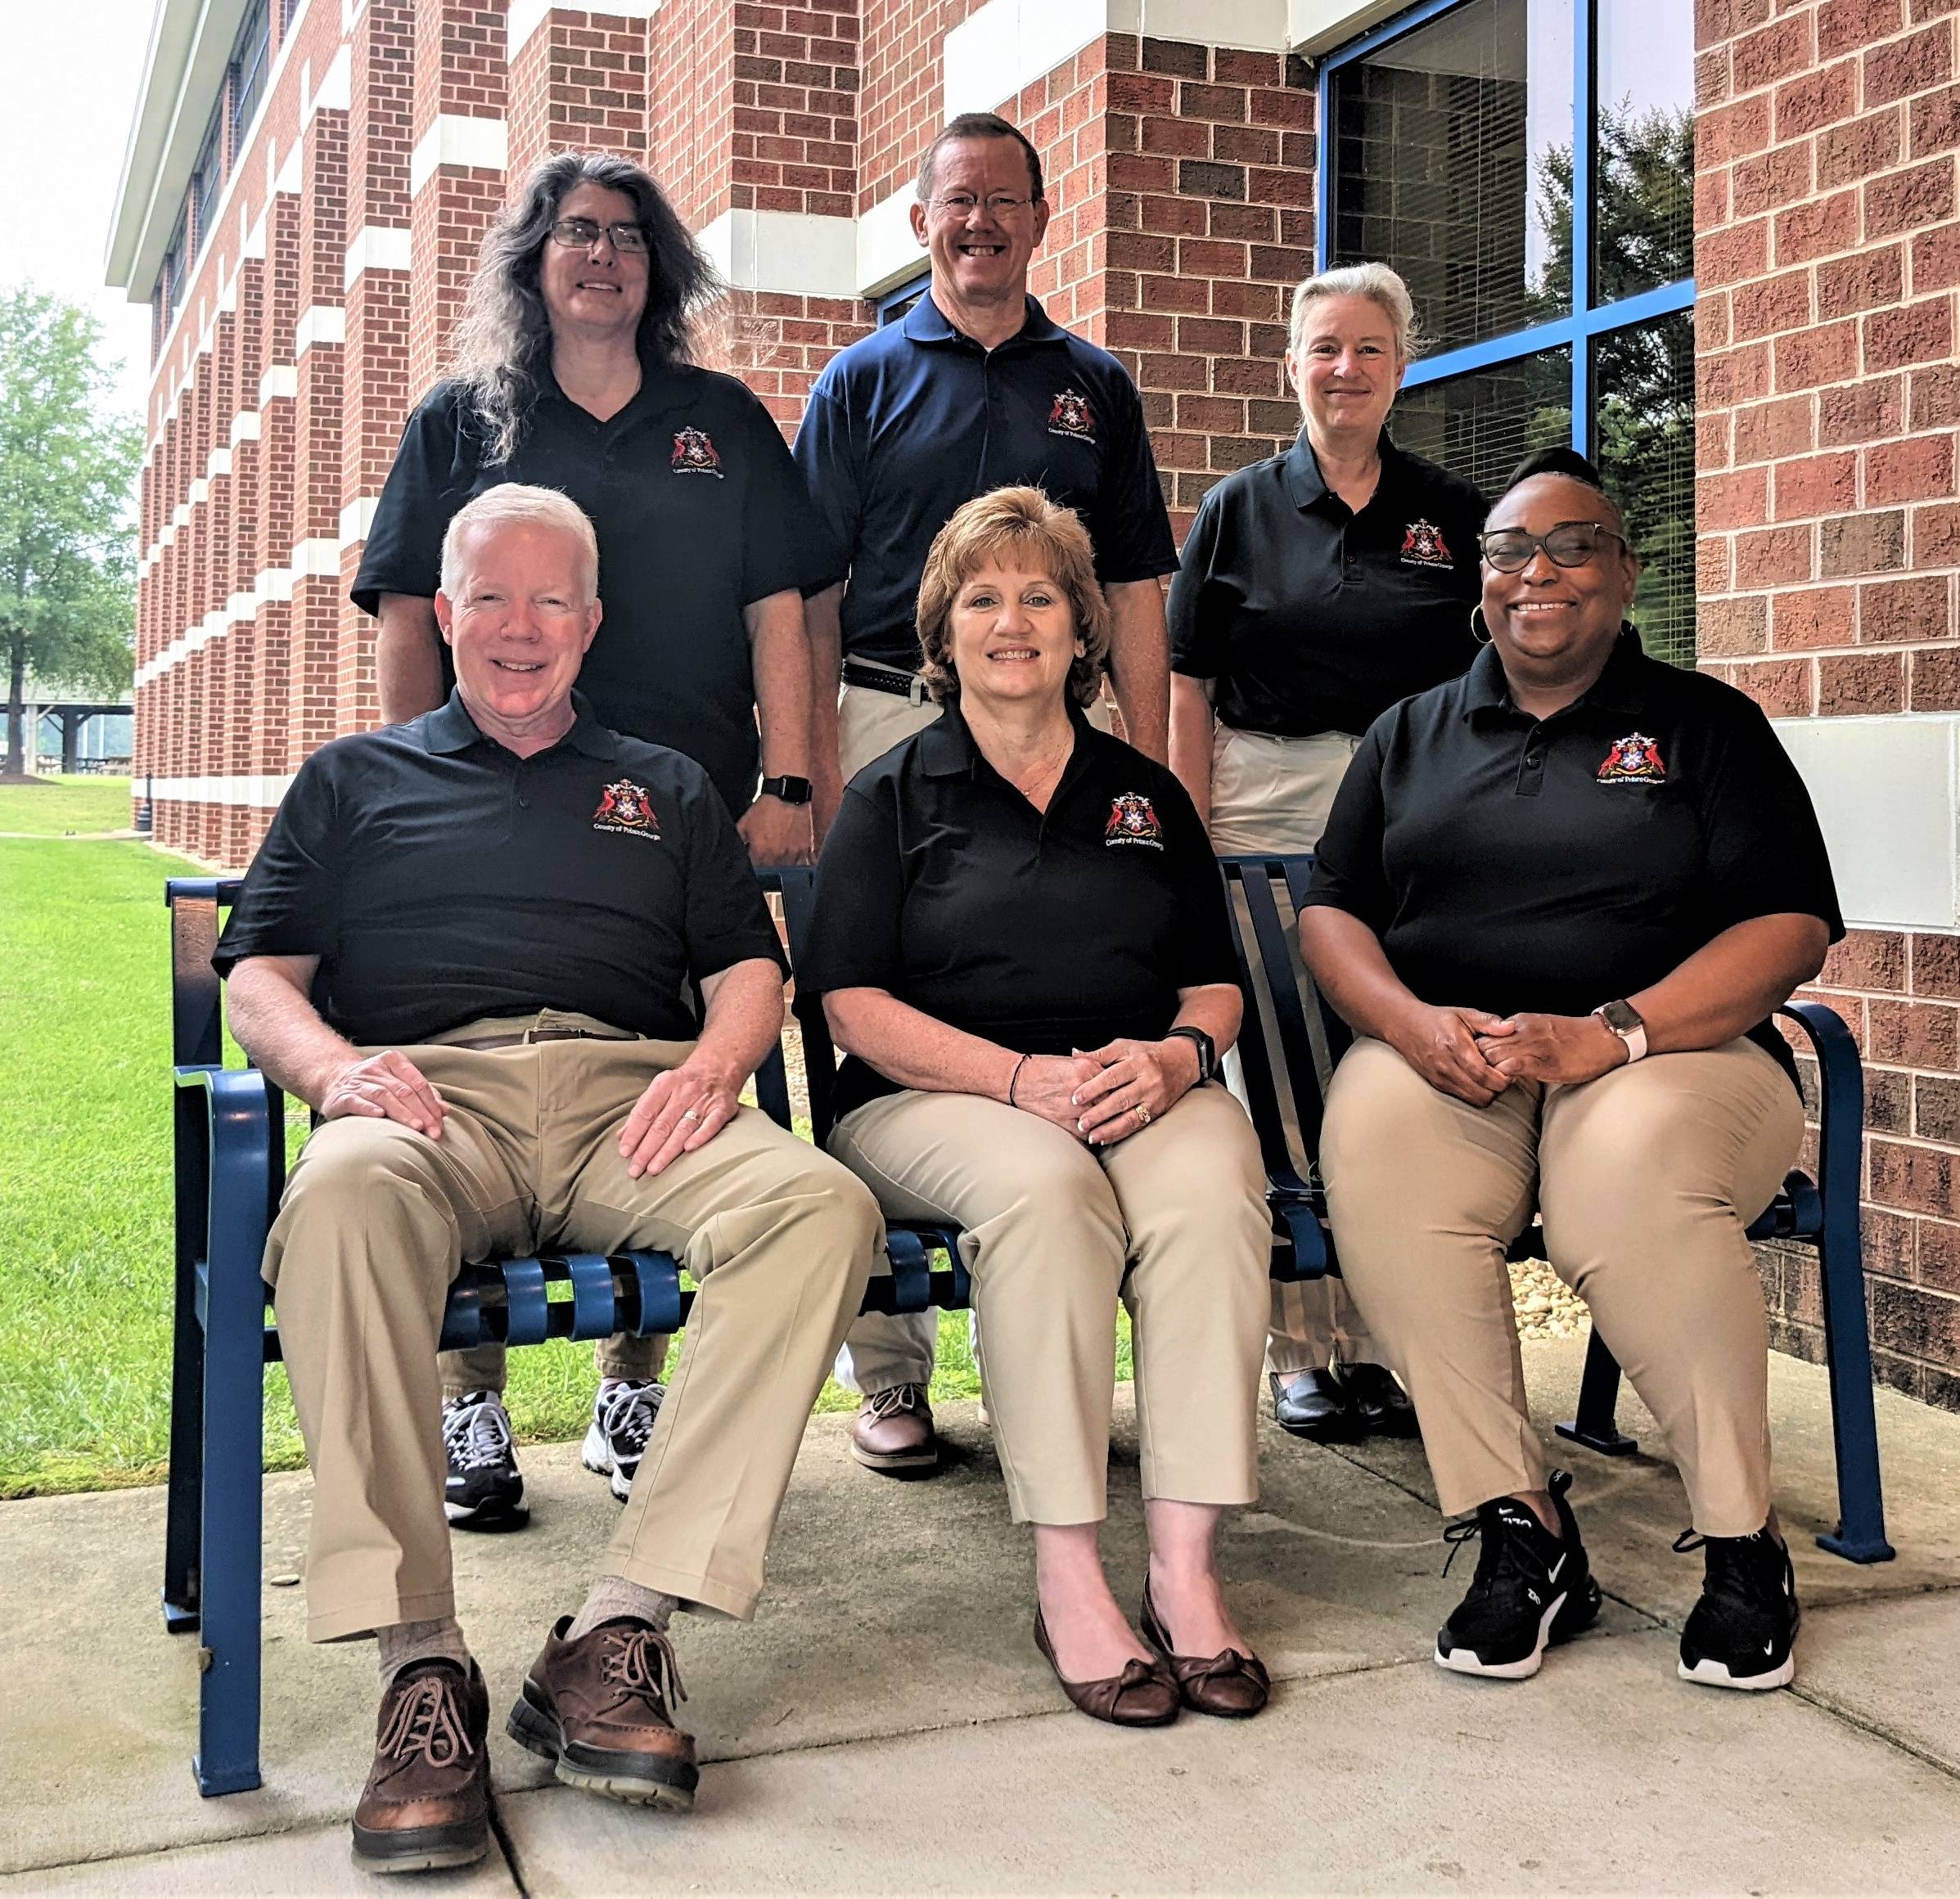 The photo depicts the Prince George County Real Estate Assessor's Team. There are six individuals in the photo. They are all smiling and wearing black polo shirts and tan pants. 